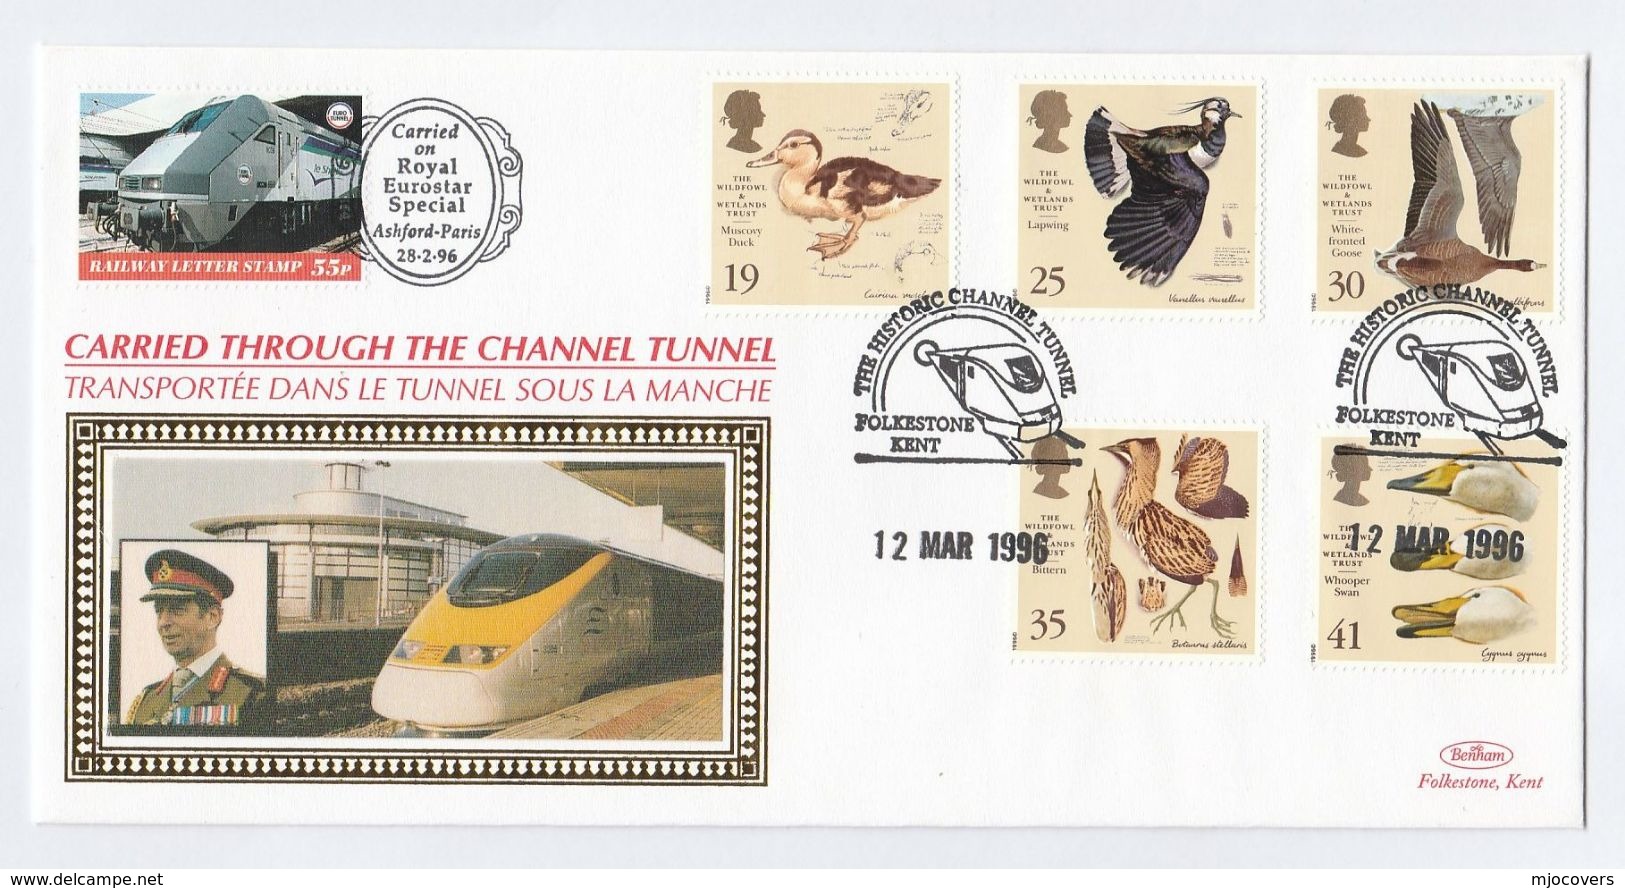 1996 FDC BIRDS - CARRIED On CHANNEL TUNNEL TRAIN GB To France Railway Stamps Cover Duck Swan Bittern Goose Lapwing Bird - Cygnes